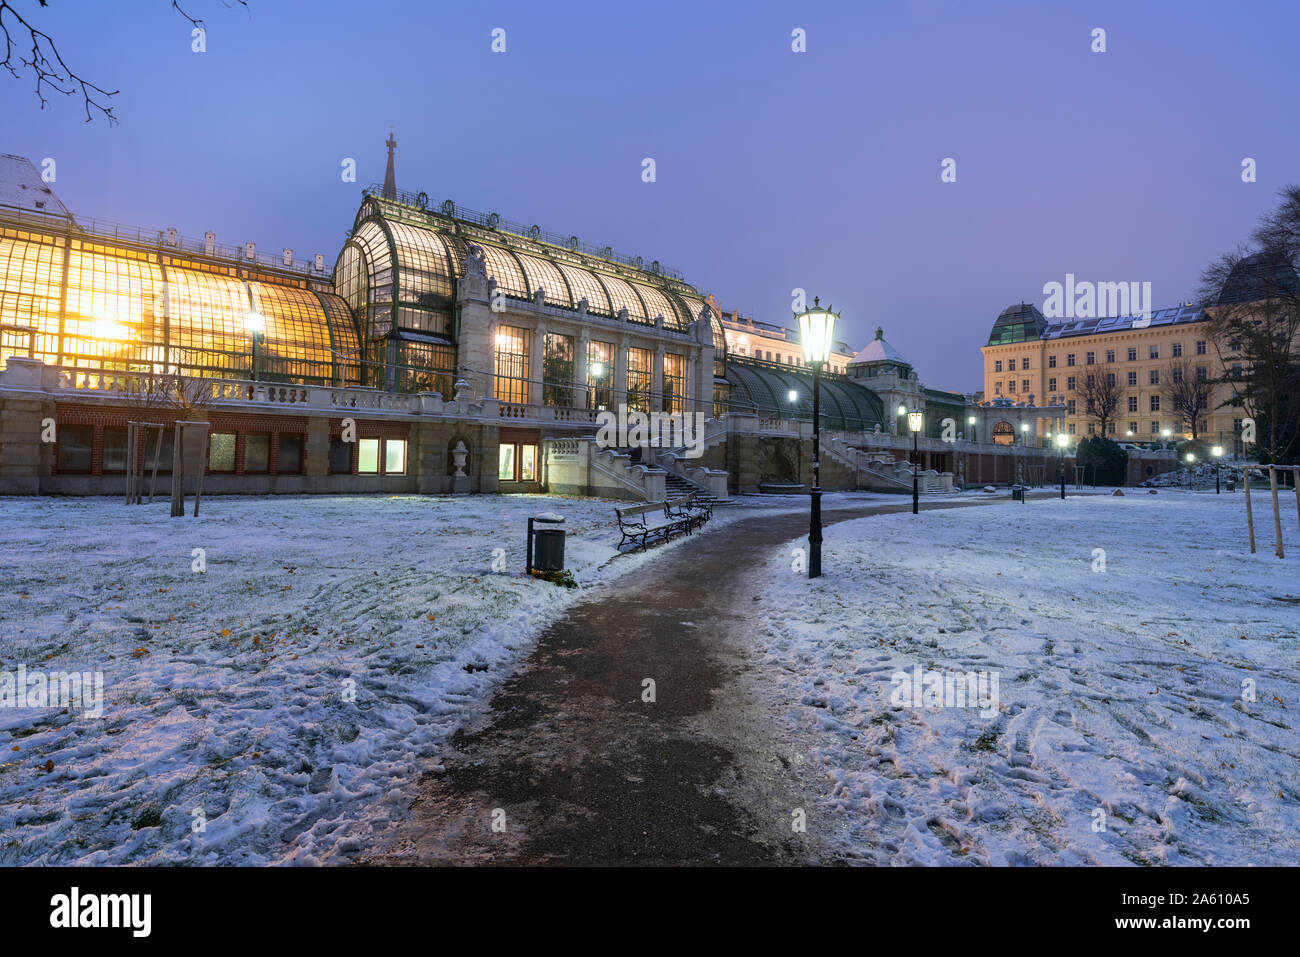 Palmenhaus greenhouse view from the Hofburg palace gardens covered with snow, Burggarten, Vienna, Austria, Europe Stock Photo